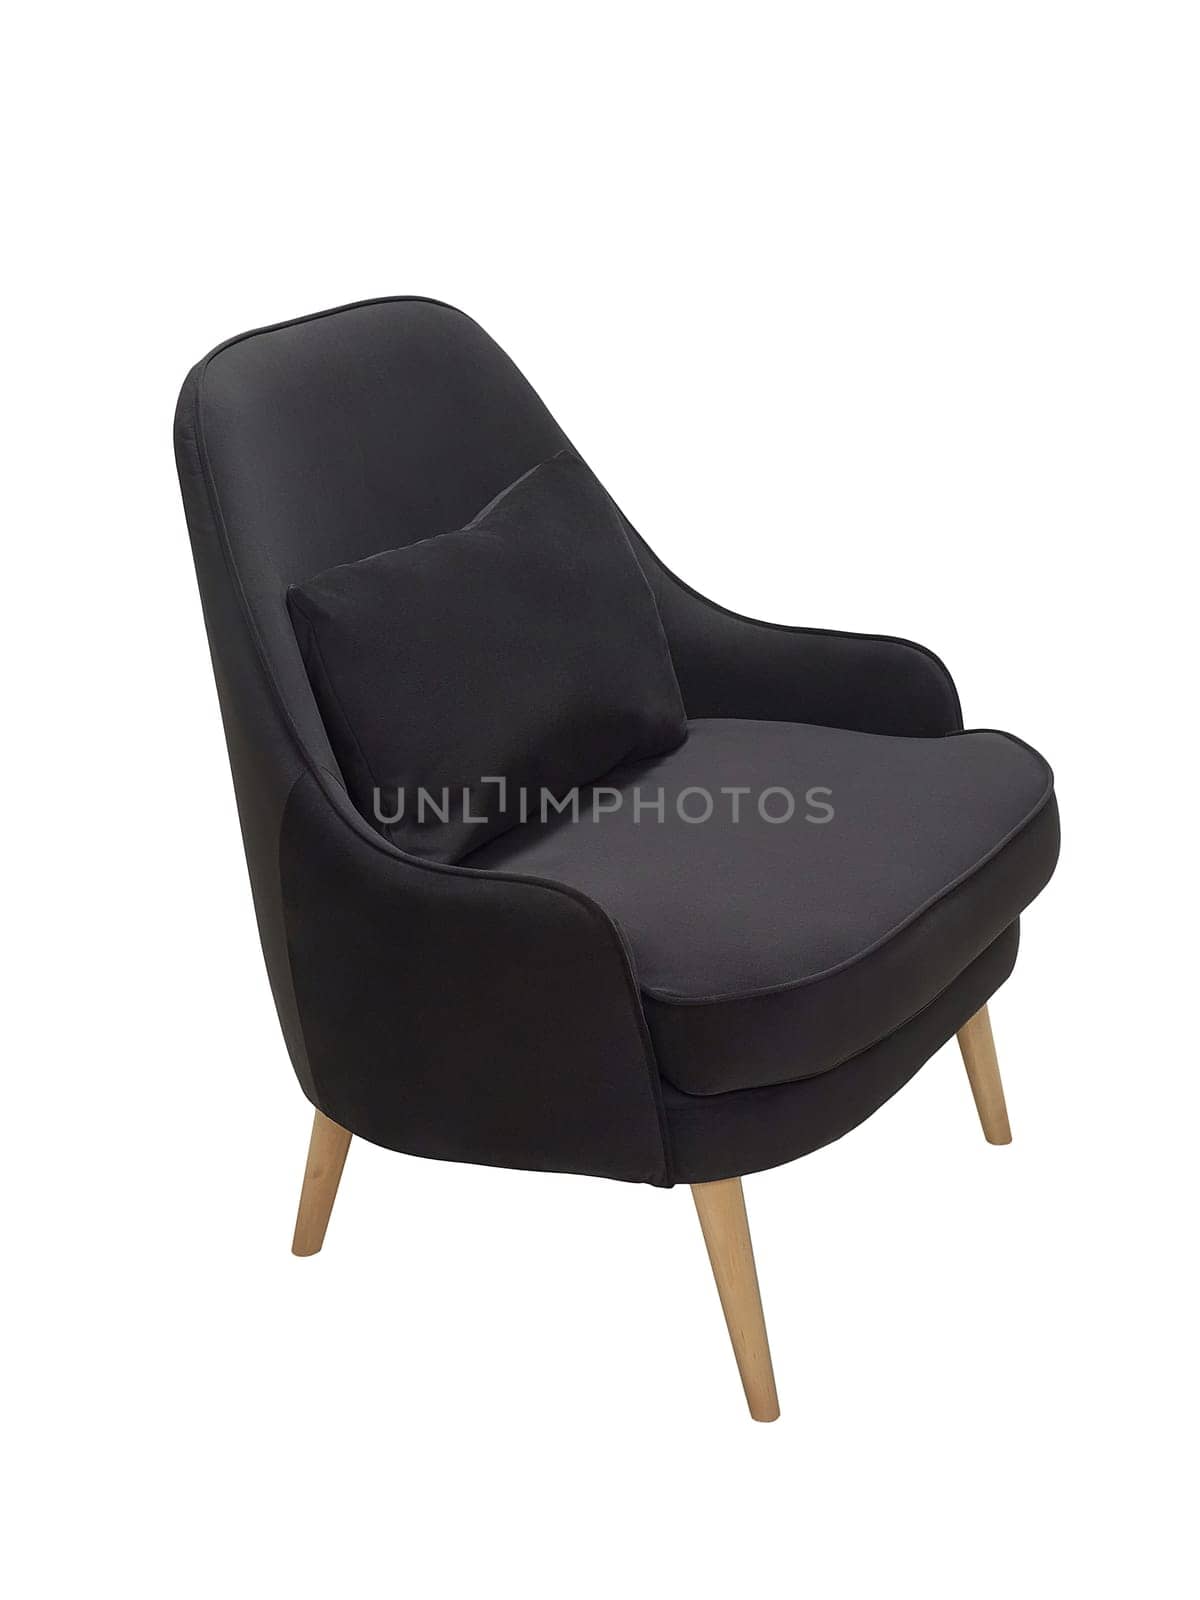 modern black fabric armchair with wooden legs isolated on white background, side view.